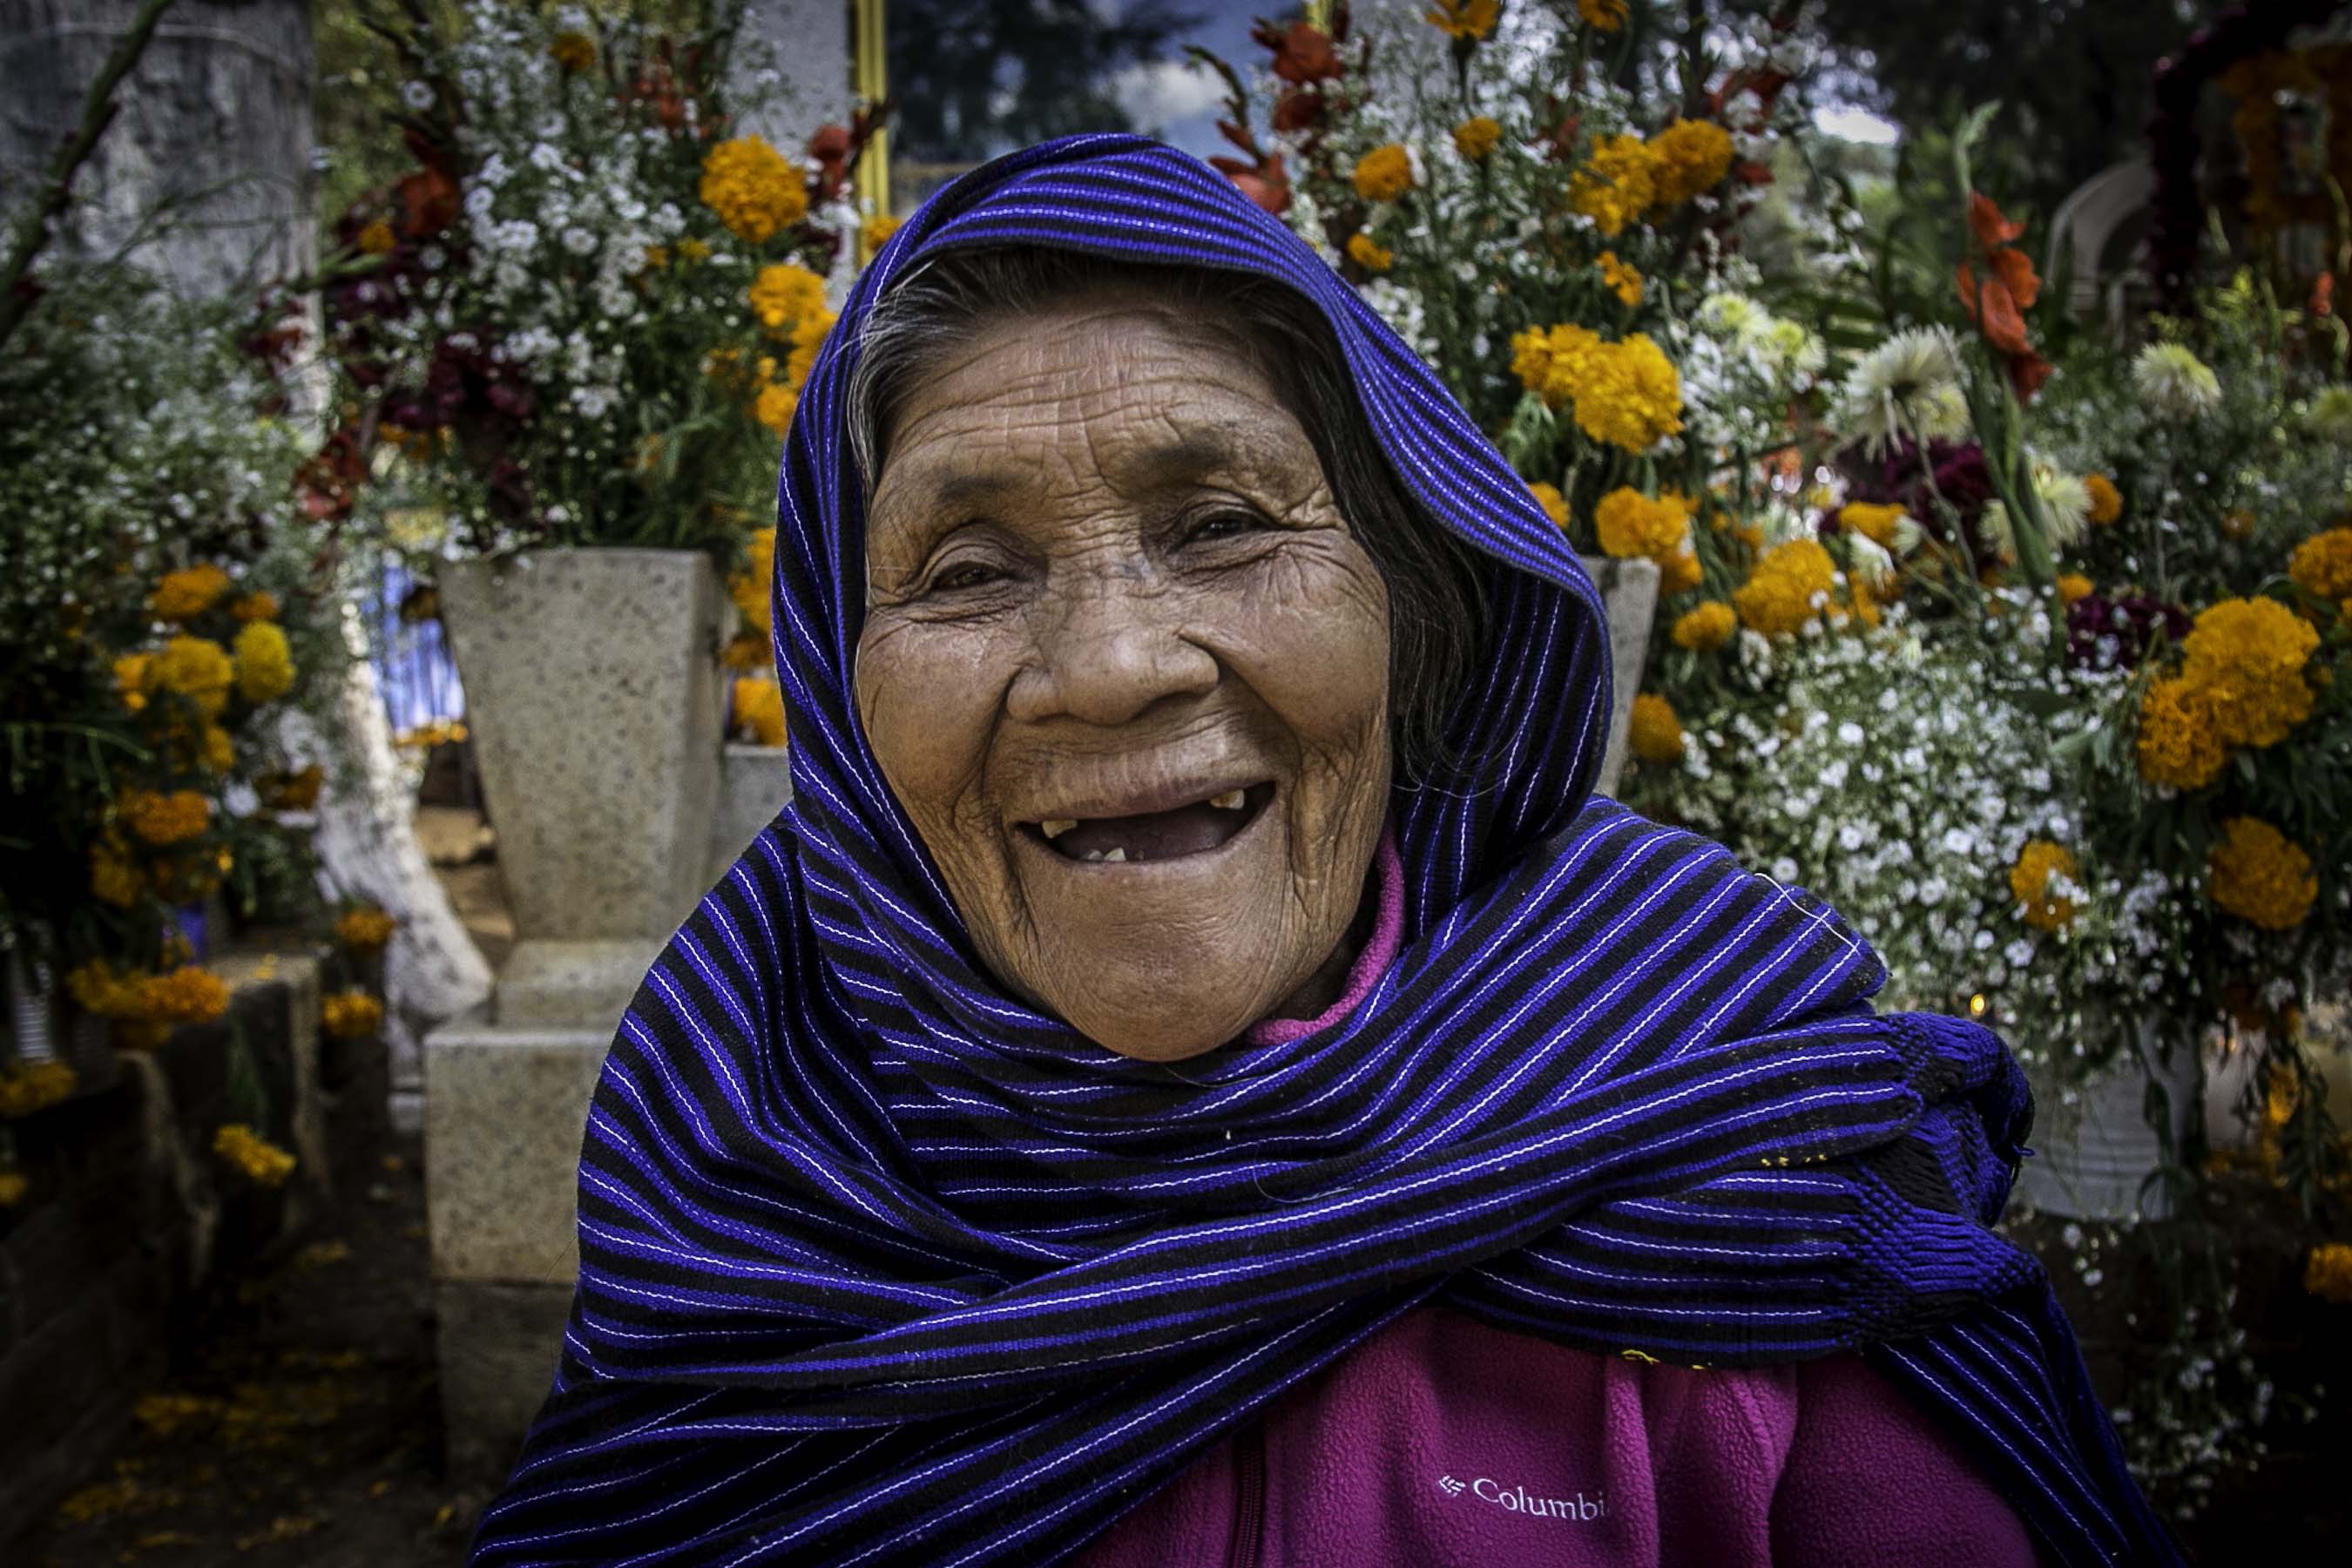 Maria Josefina's smile exemplifies the spirit of "Dia de los Muertos". She invited me for a mezcal, all while she shared her Purépecha ancestry, her love for her grandchildren, her aching in her bones, and her beautiful smile. 